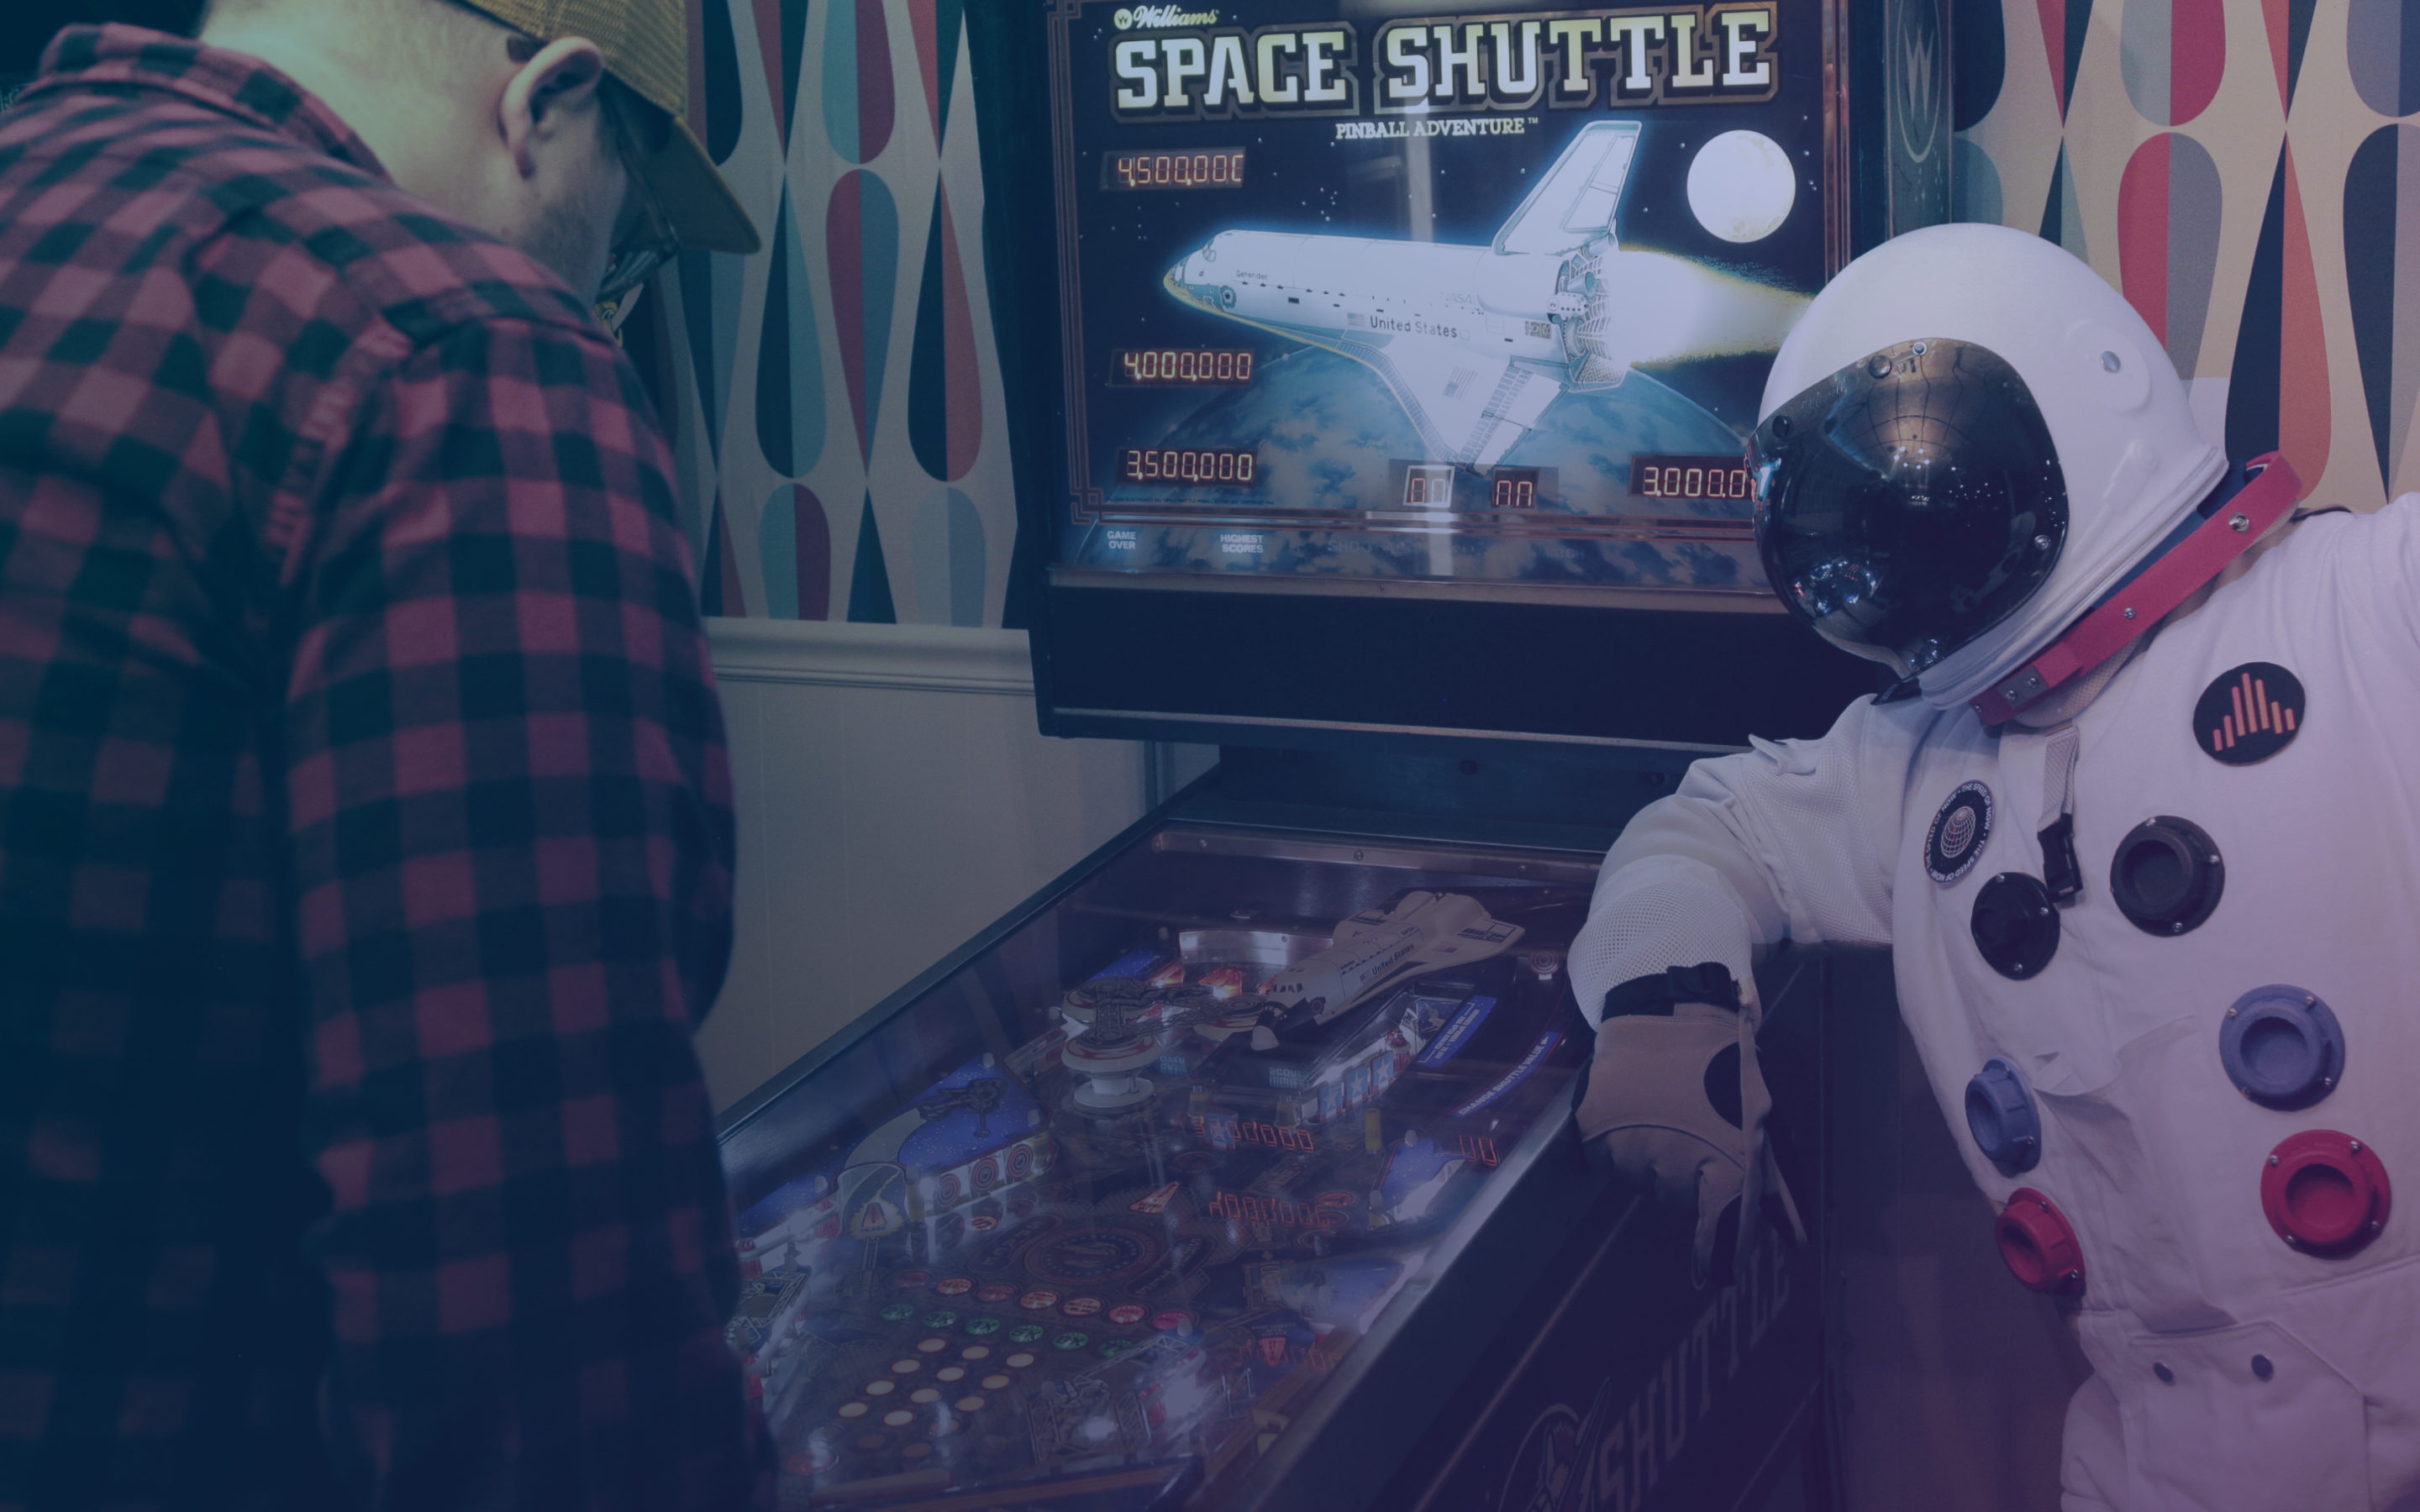 An astronaut leaning on a pinball machine.